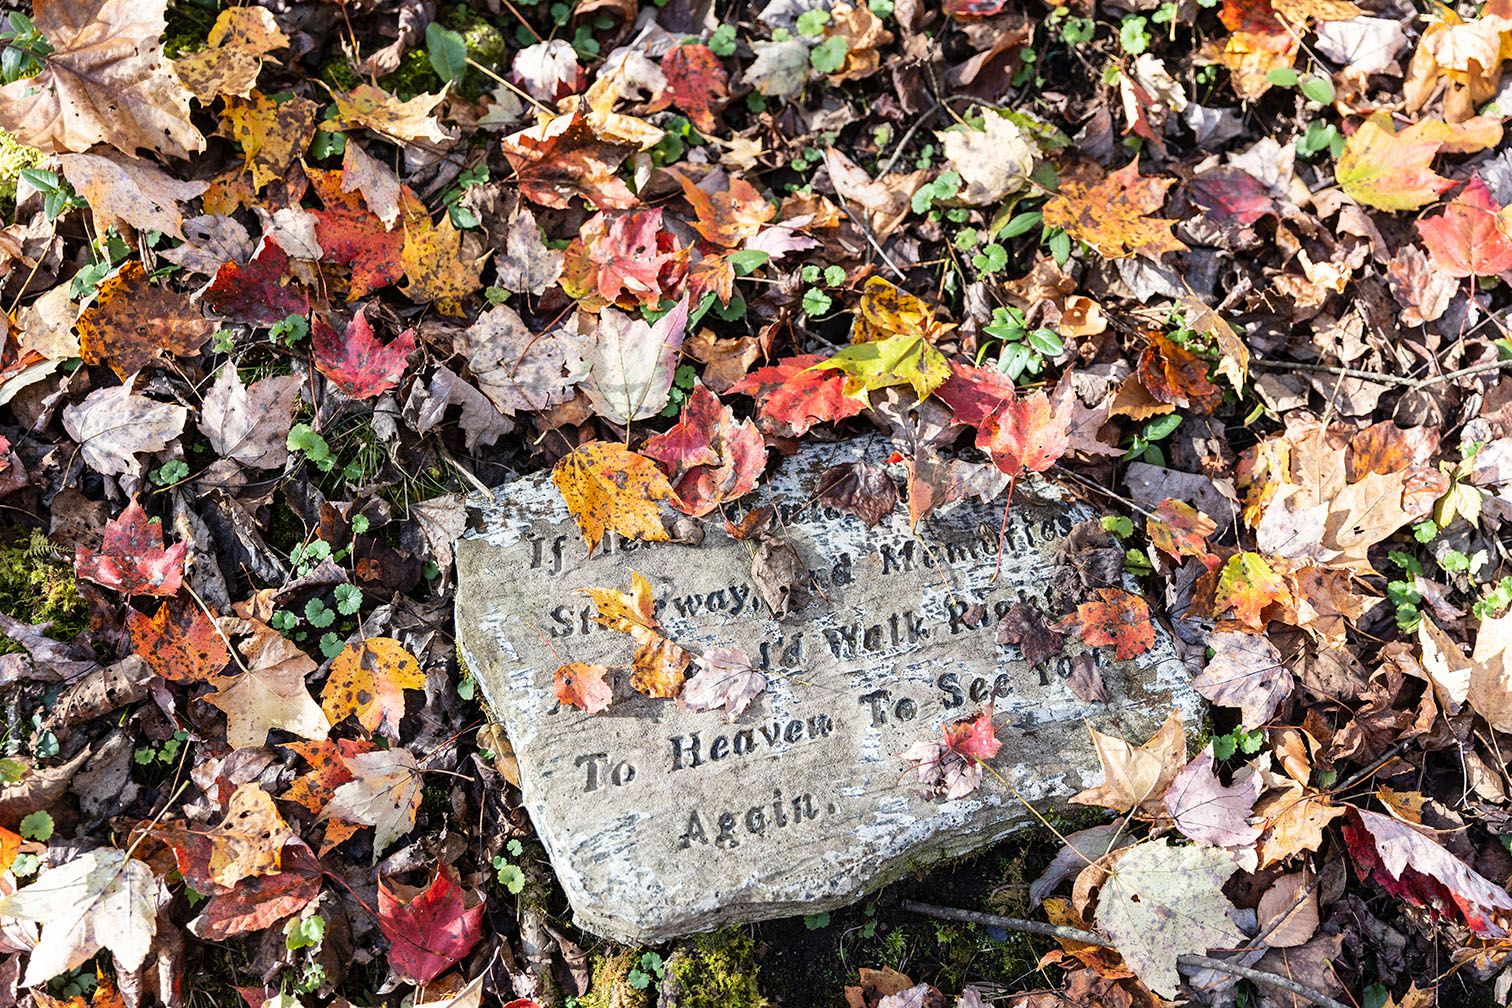 A gravestone engraved with text, on the ground, surrounded by fallen leaves.